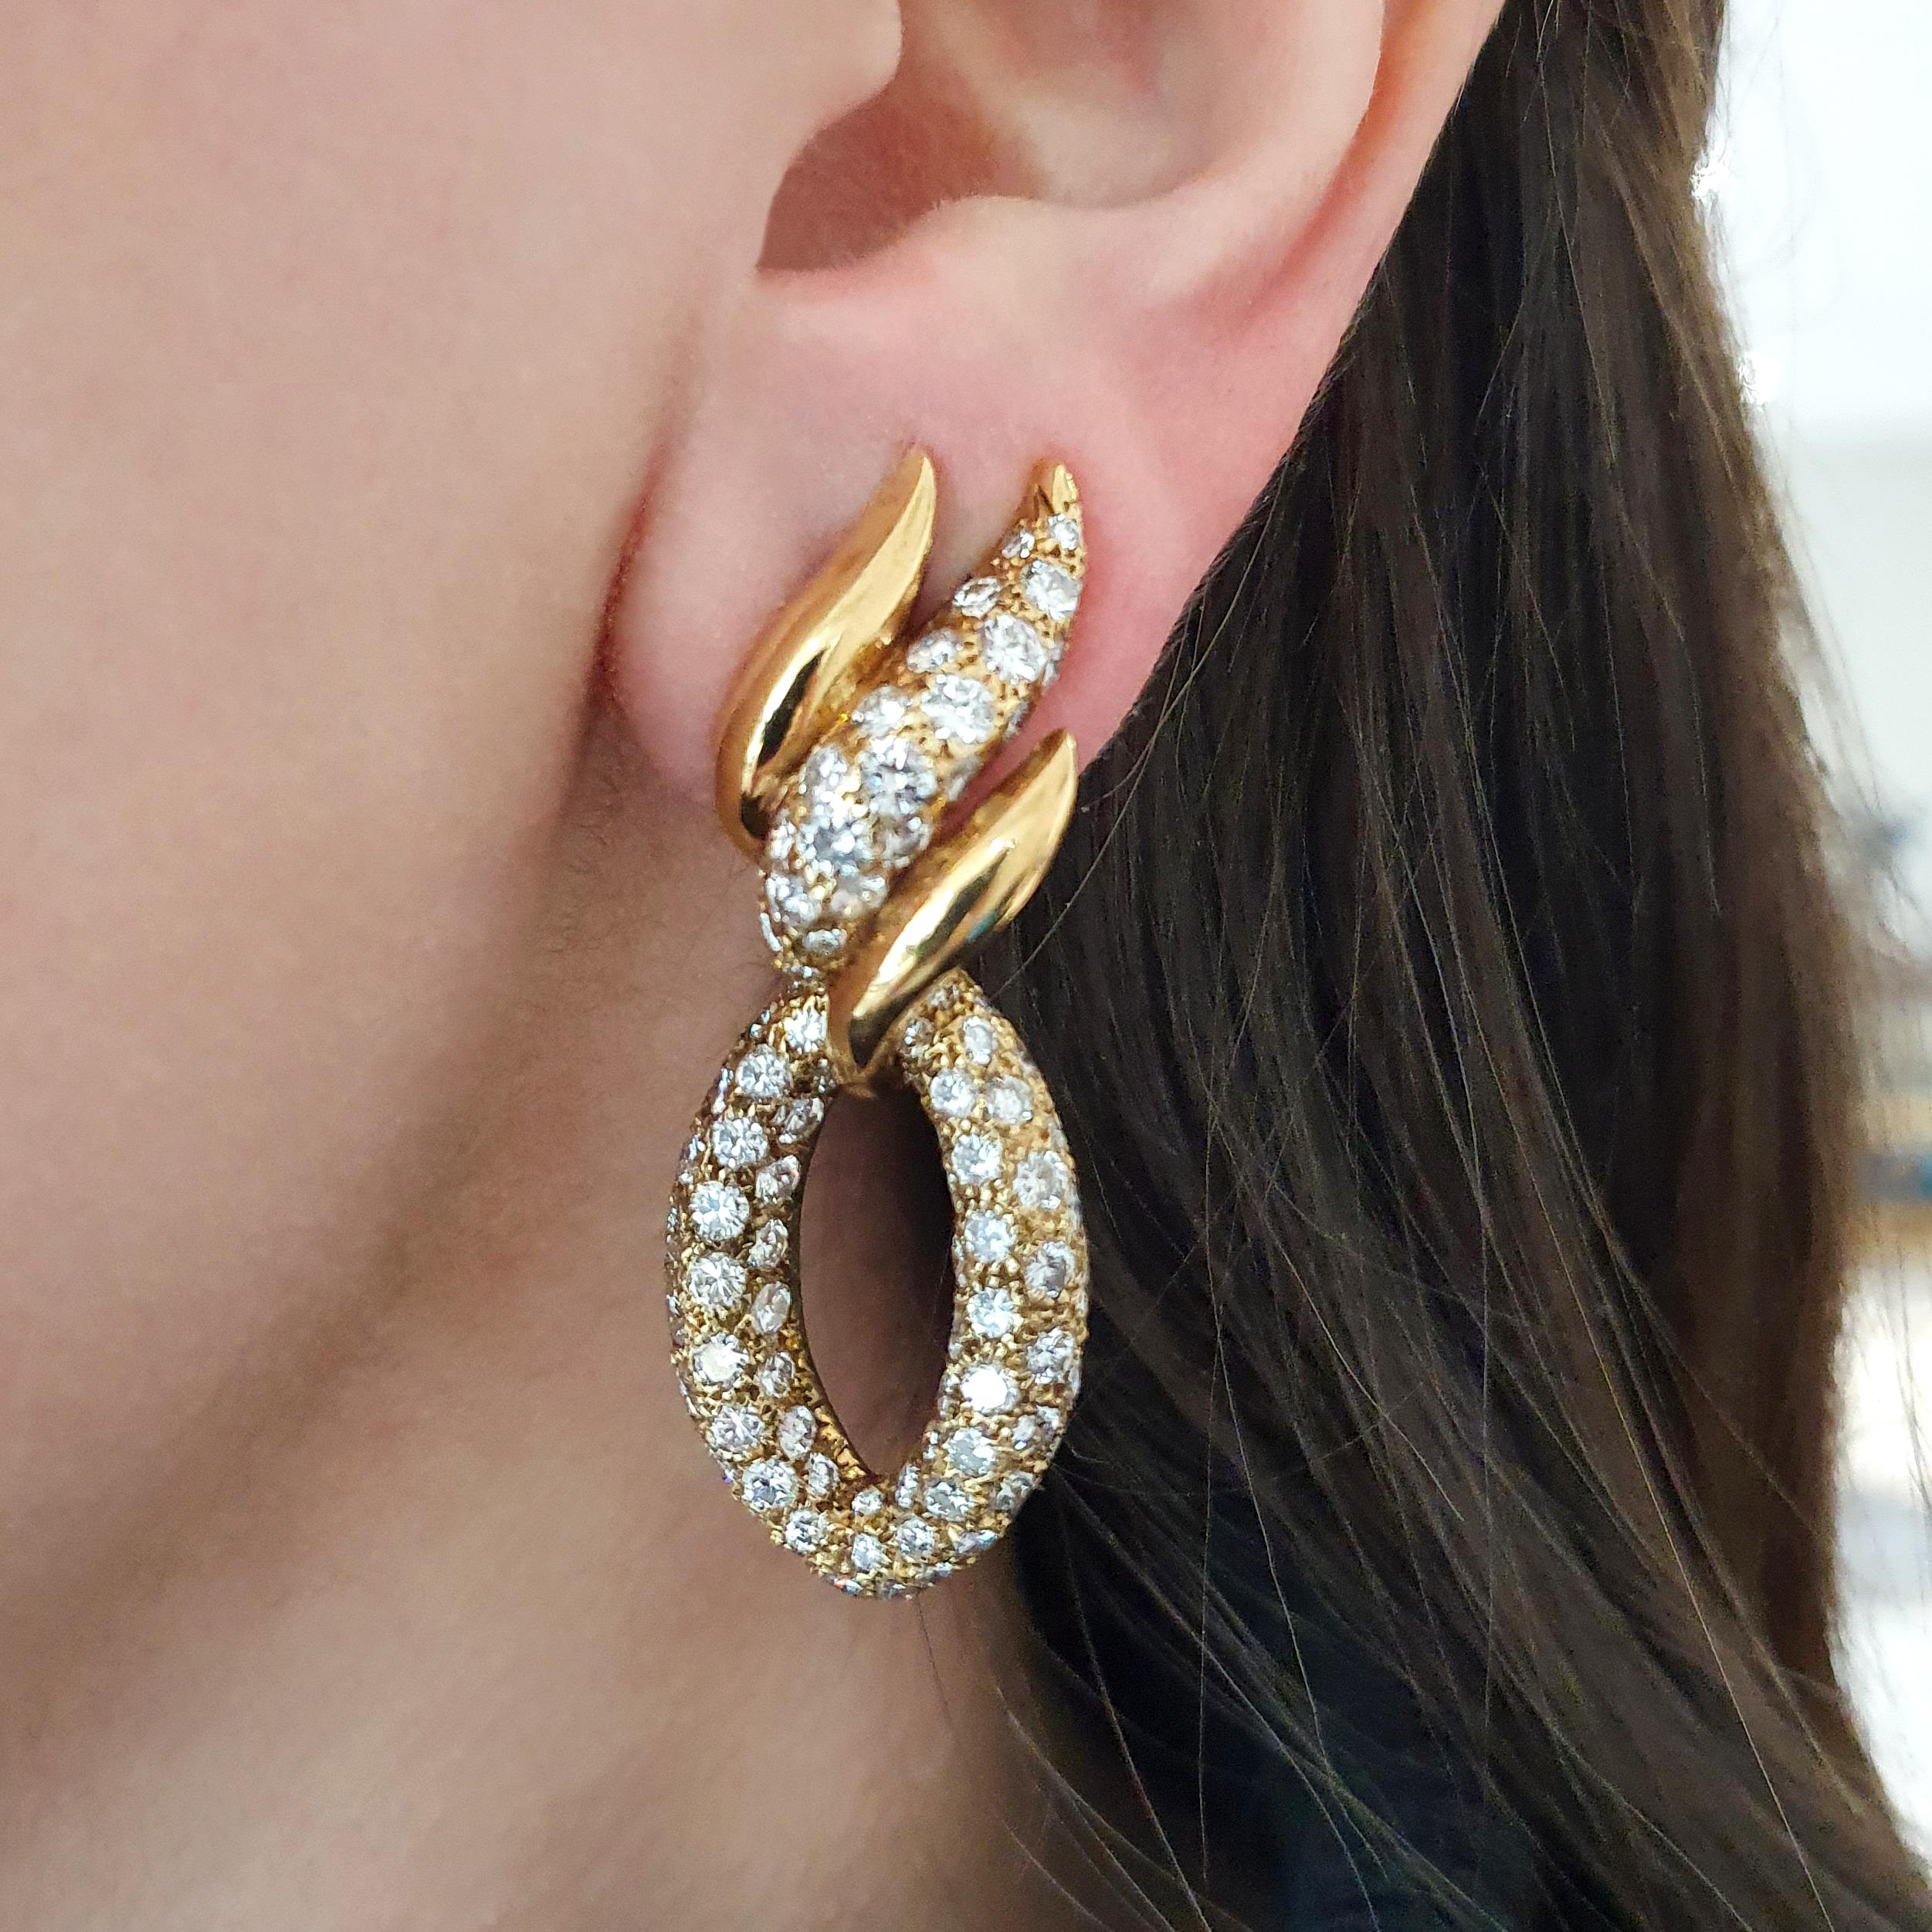 From an Italian Lady.
Dazzling Ear Pendants pavé Round cut Diamond mounted on yellow gold 750 18k.
Circa 1970.
Total Length: 1.97 inches (5.00 centimeters)
Gross weight: 35.09 grams.